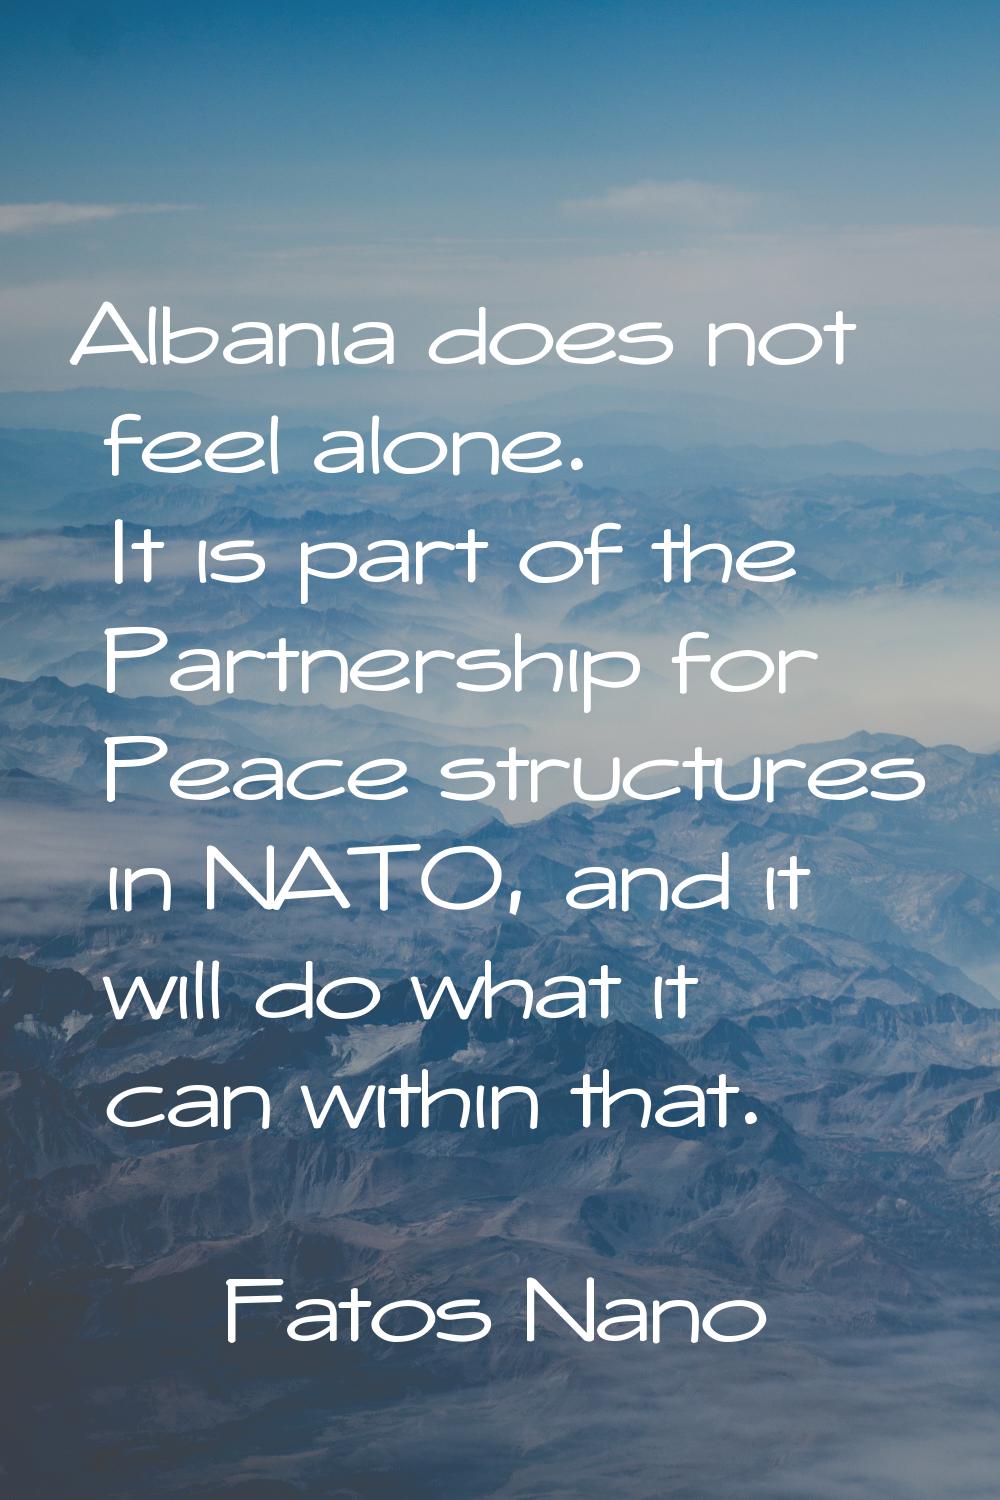 Albania does not feel alone. It is part of the Partnership for Peace structures in NATO, and it wil